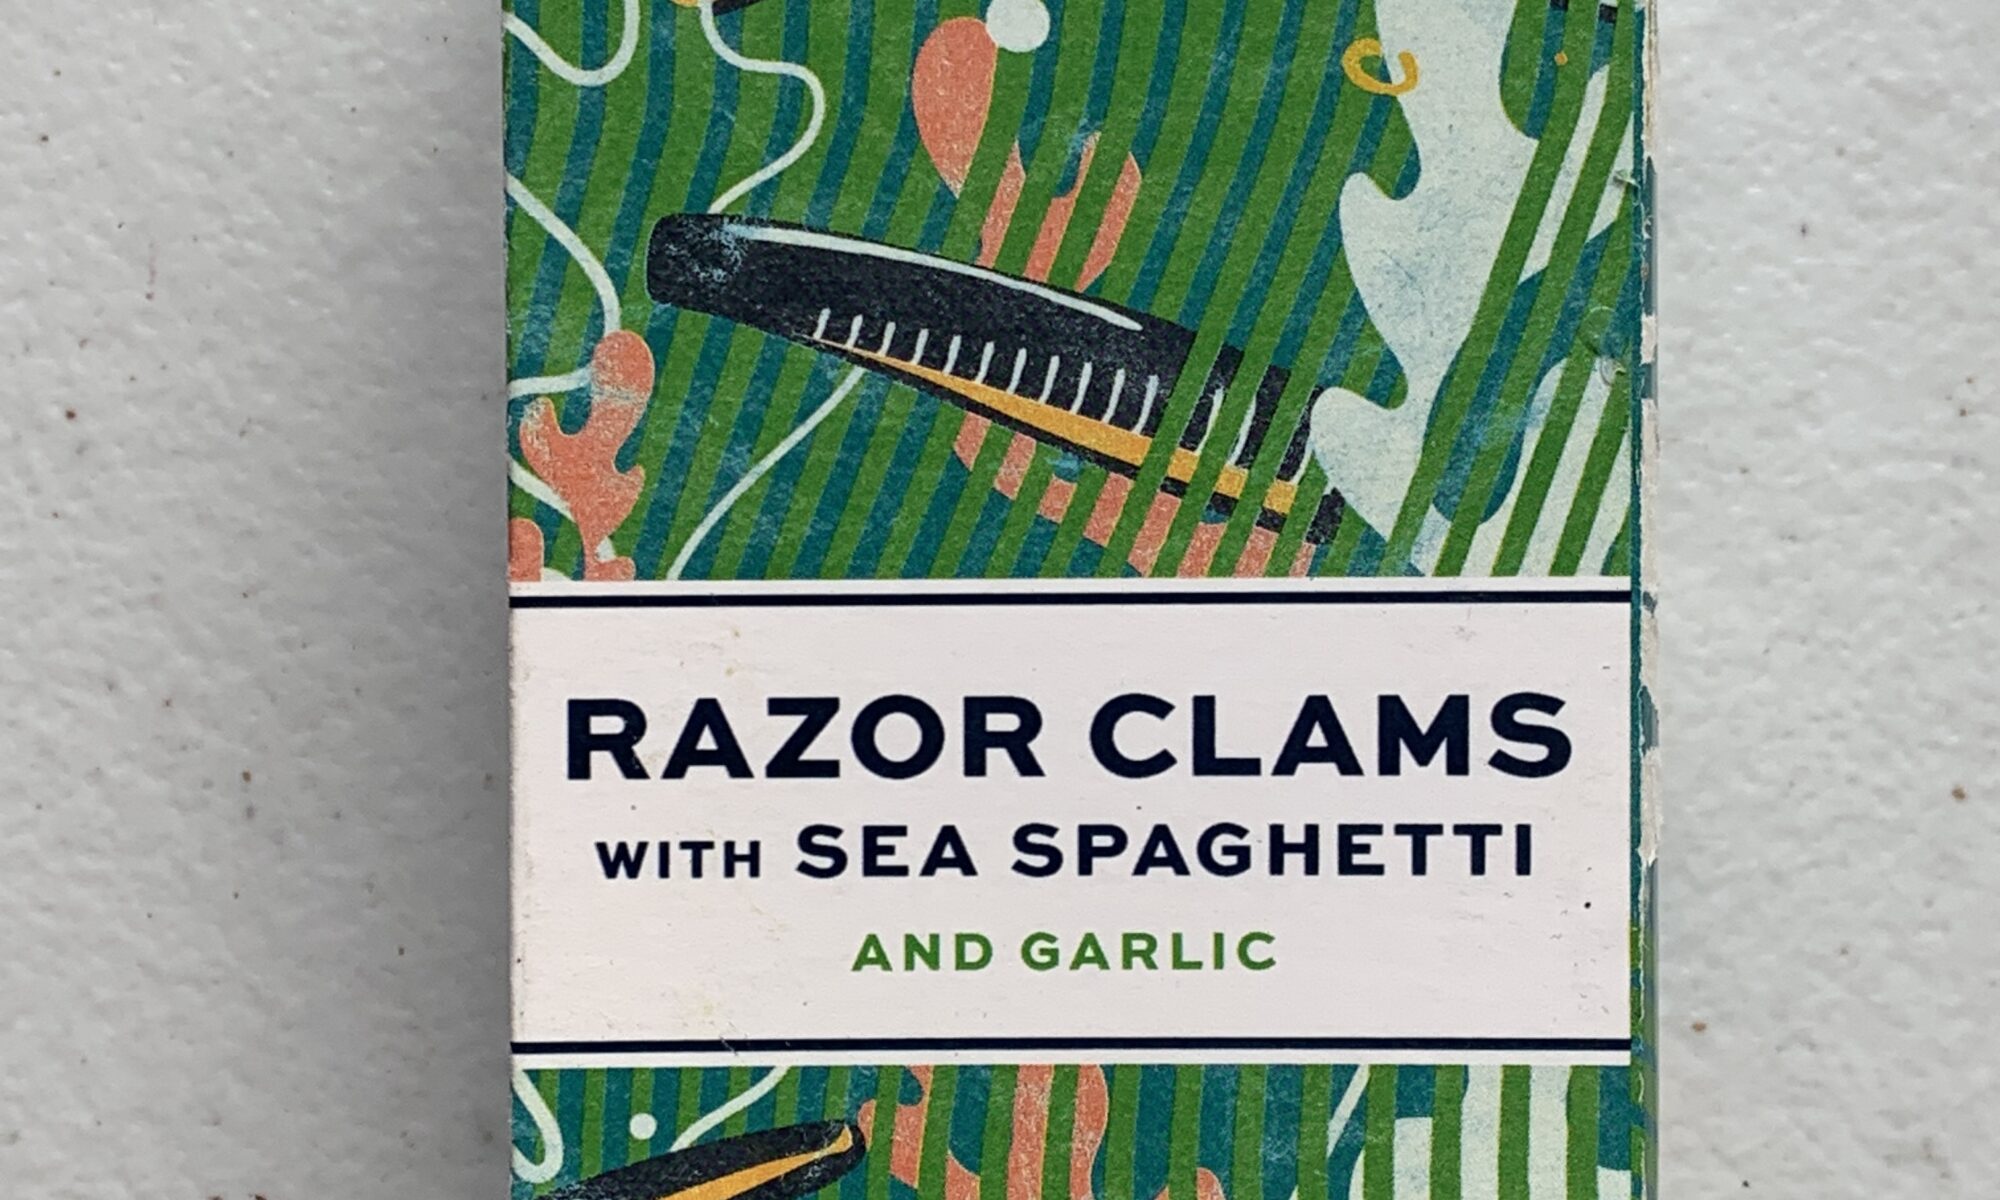 Image of the front of a package of Porto-Muiños Razor Clams with Sea Spaghetti and Garlic